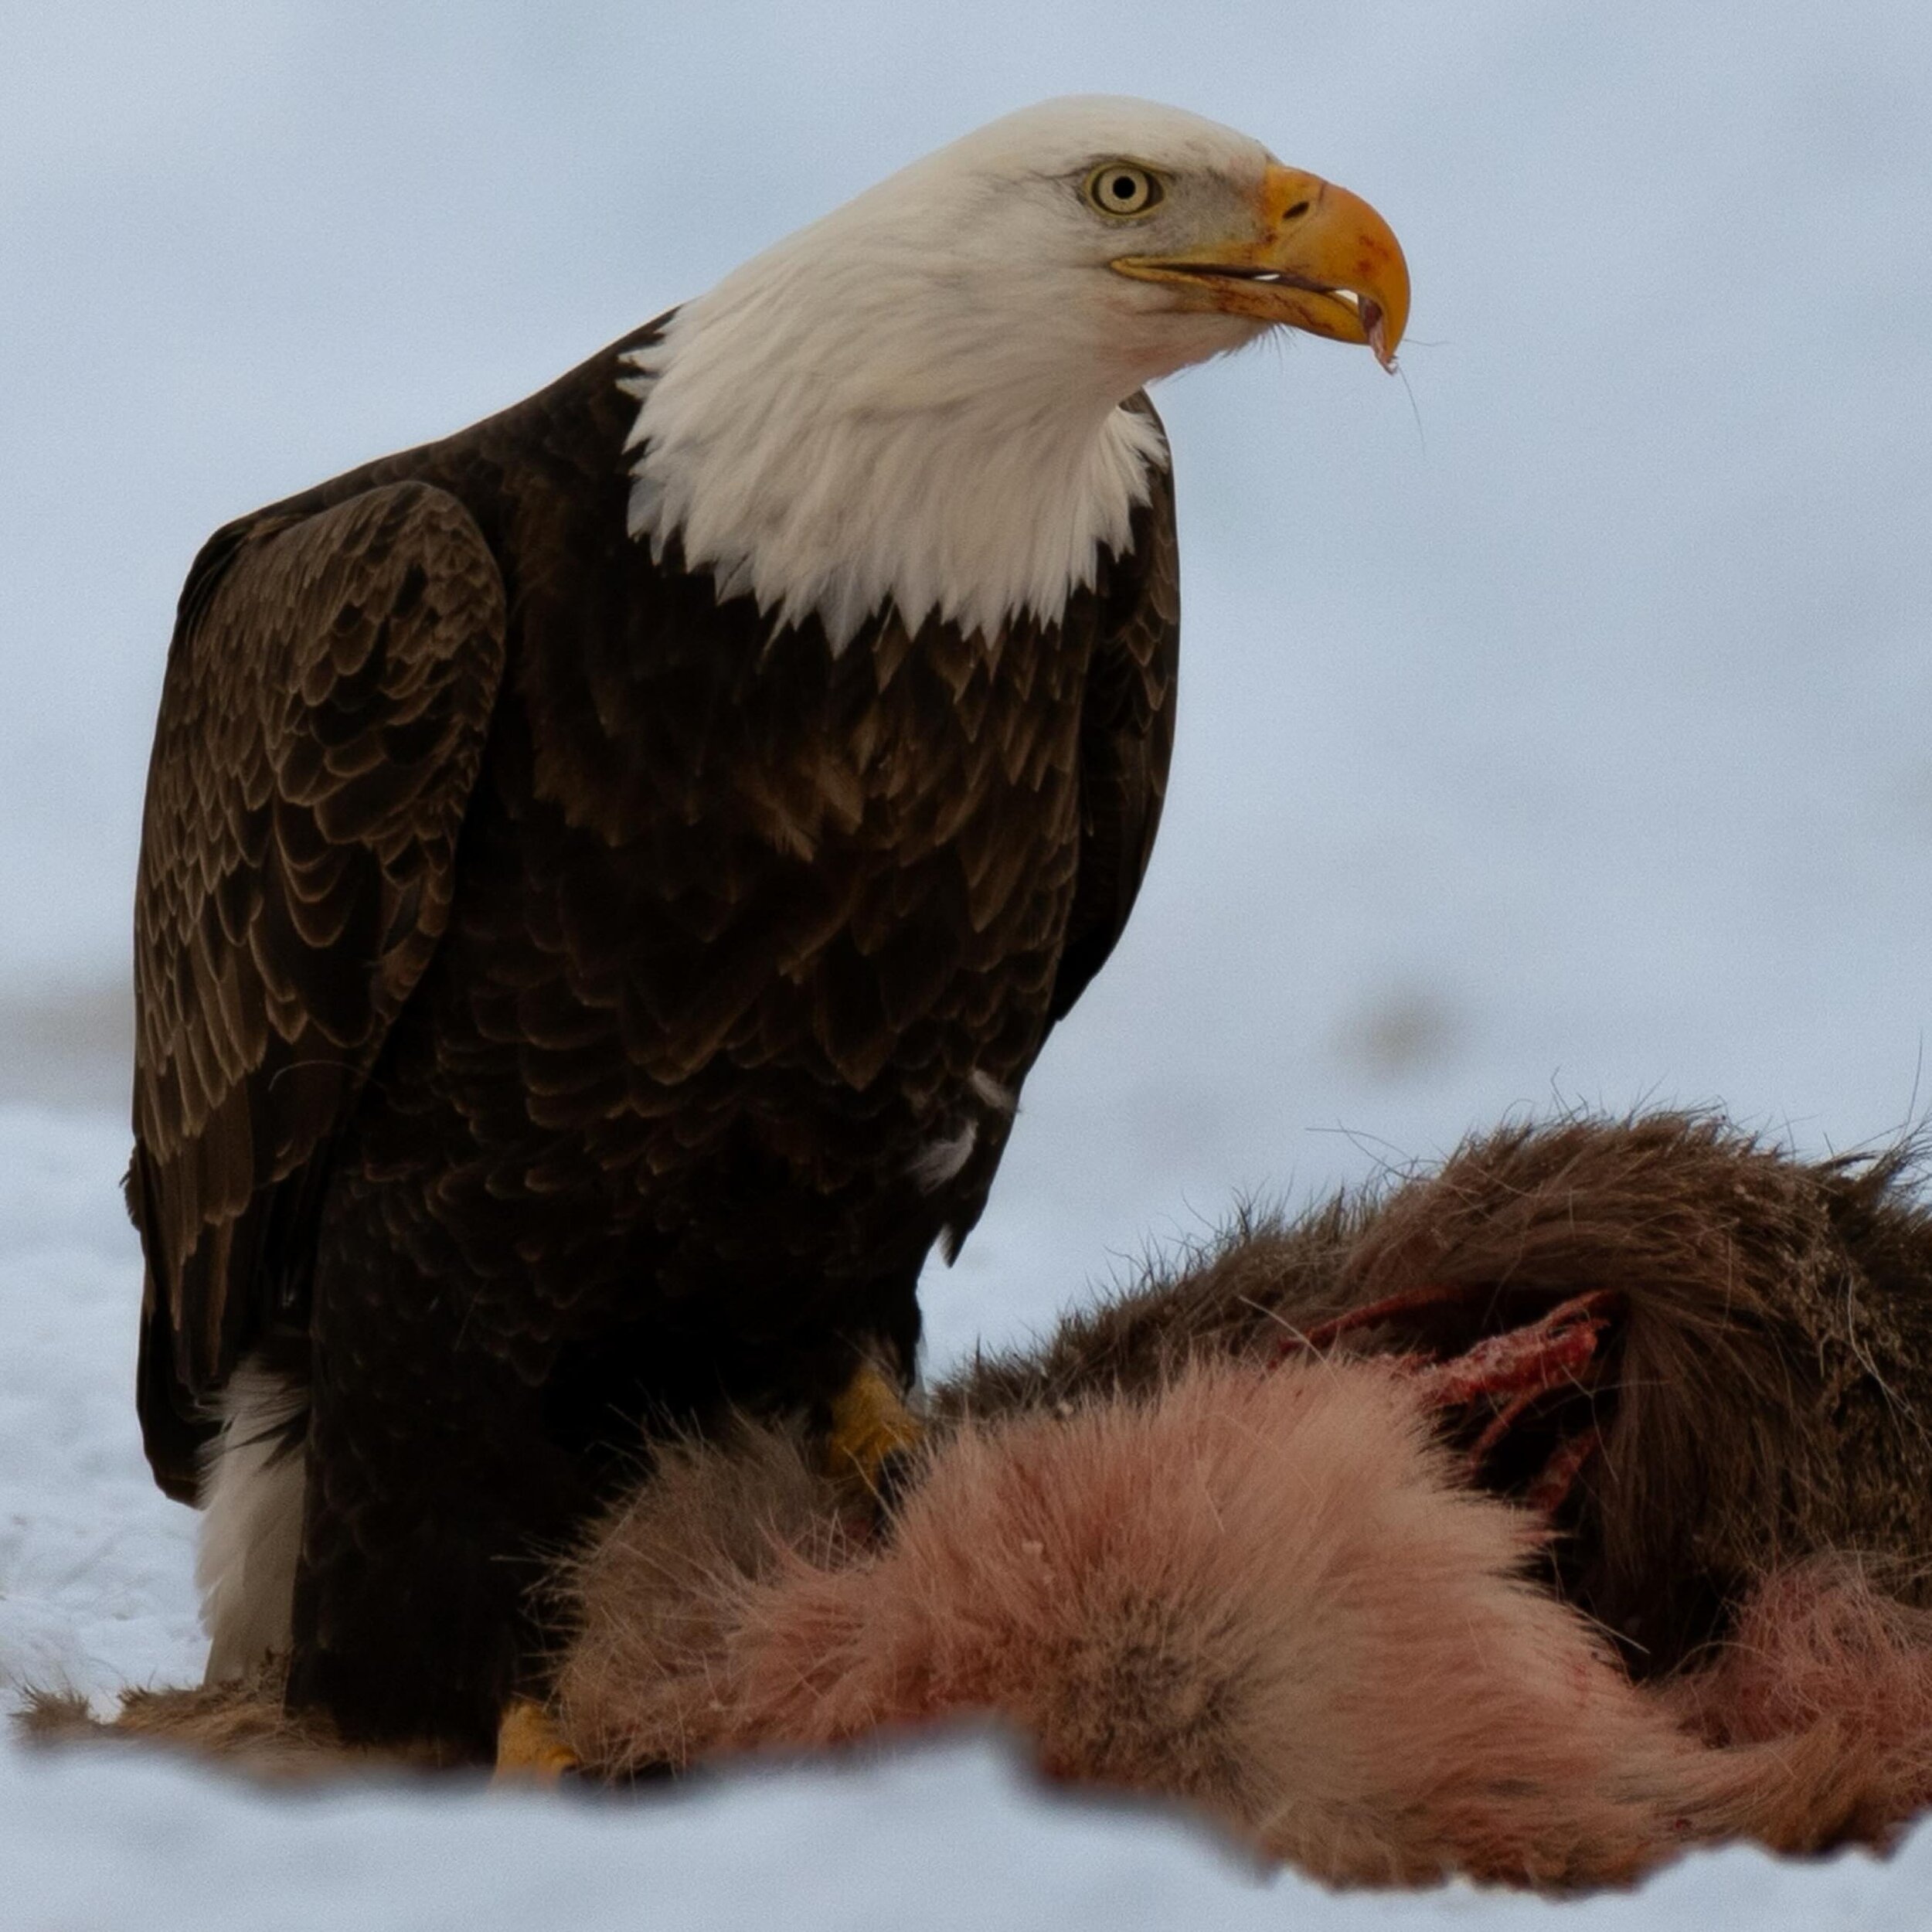 Grounded bald eagles don&rsquo;t hang around for long. This one was fighting off 4-5 others as they snacked in roadkill in the fresh snow. 

#minnesota #eagle #wildlife #snowstorms #roadkill #birdsofinstagram #raptors